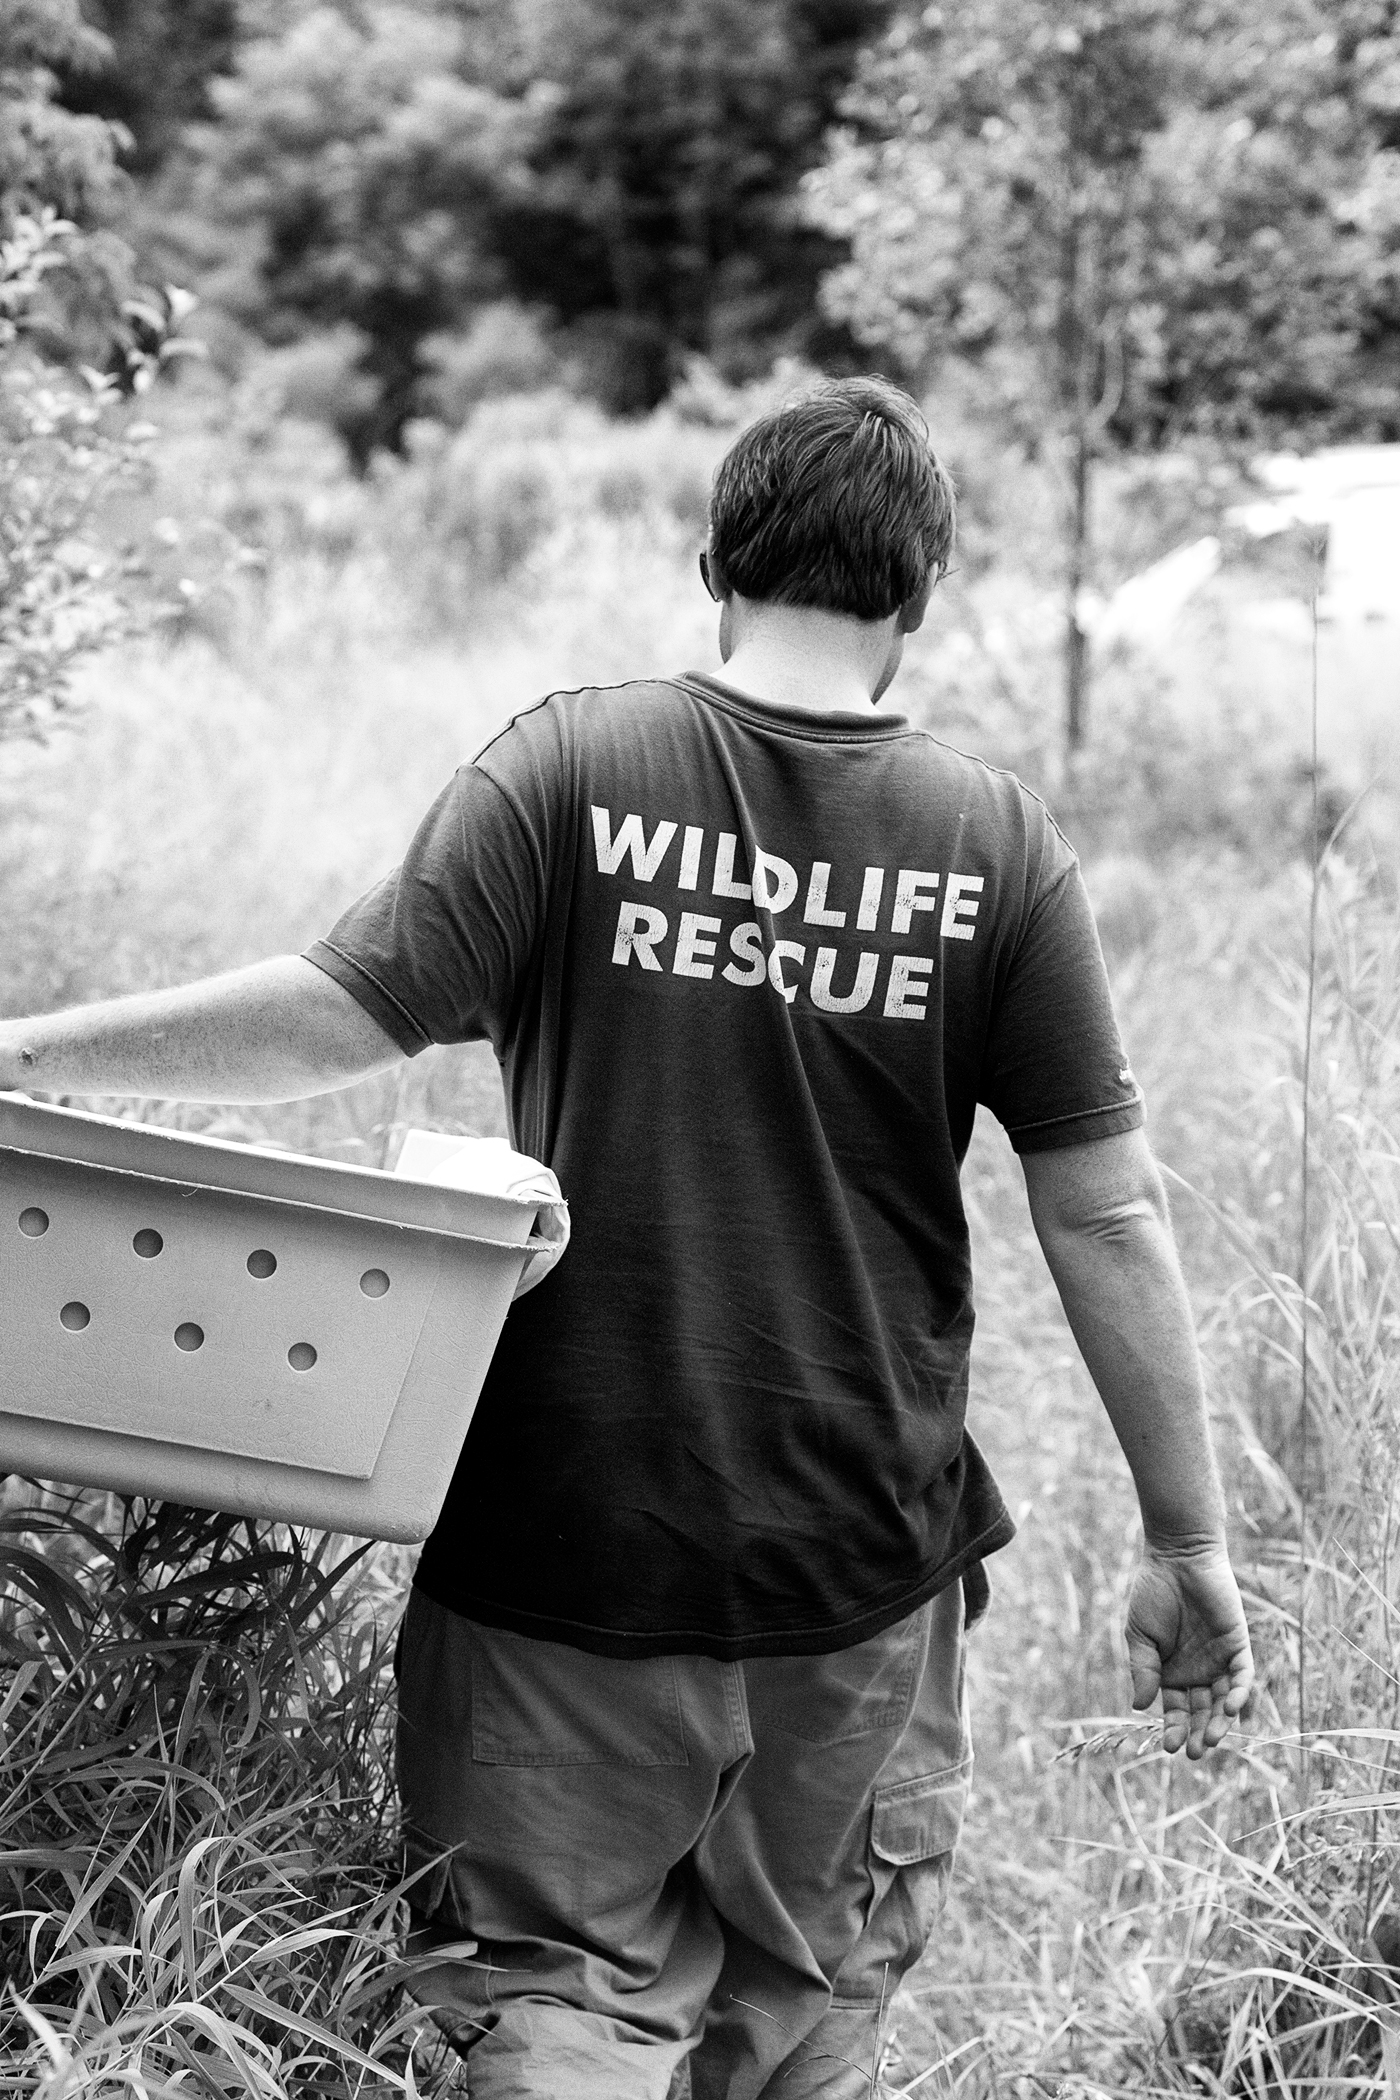 A man wearing a shirt reading "Wildlife Rescue" carries a crate in a field.